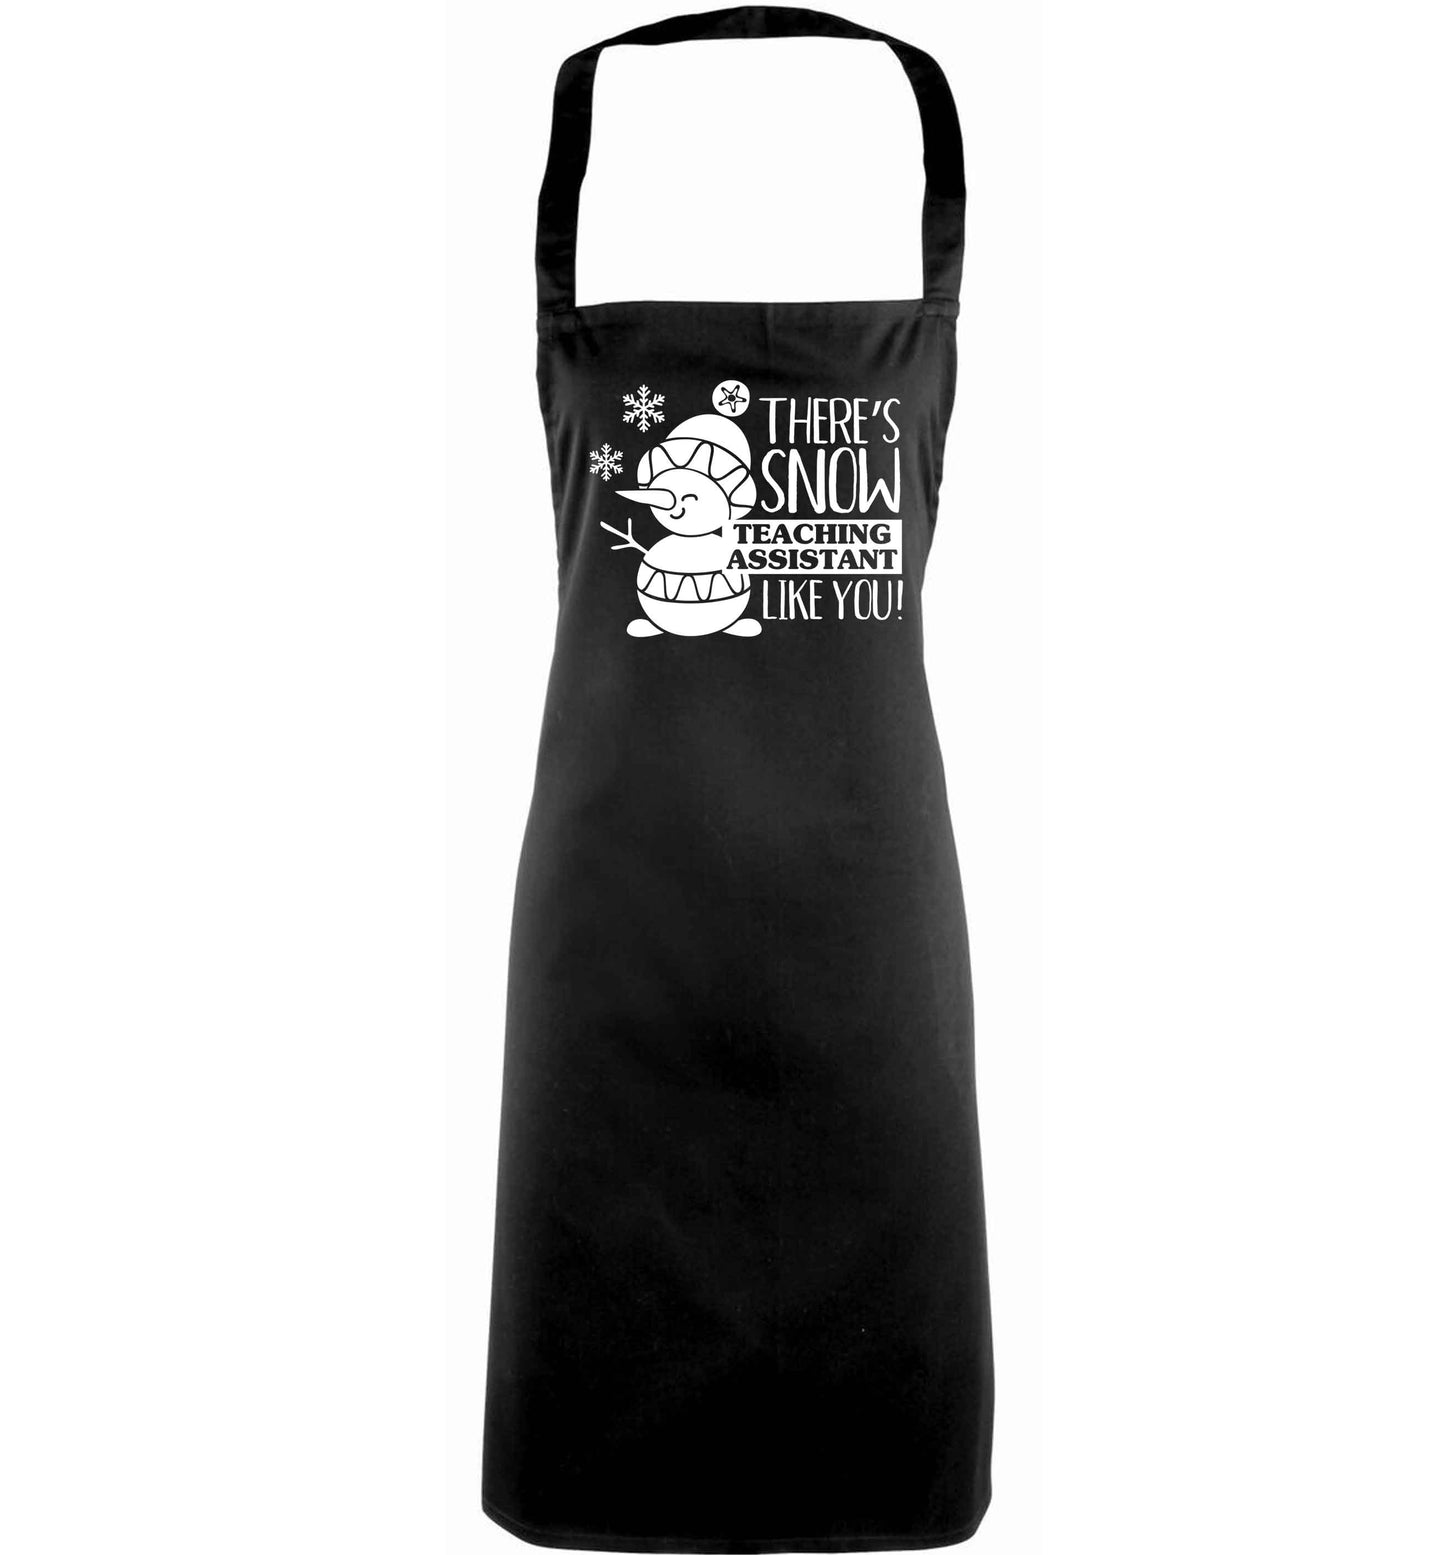 There's snow teaching assistant like you adults black apron